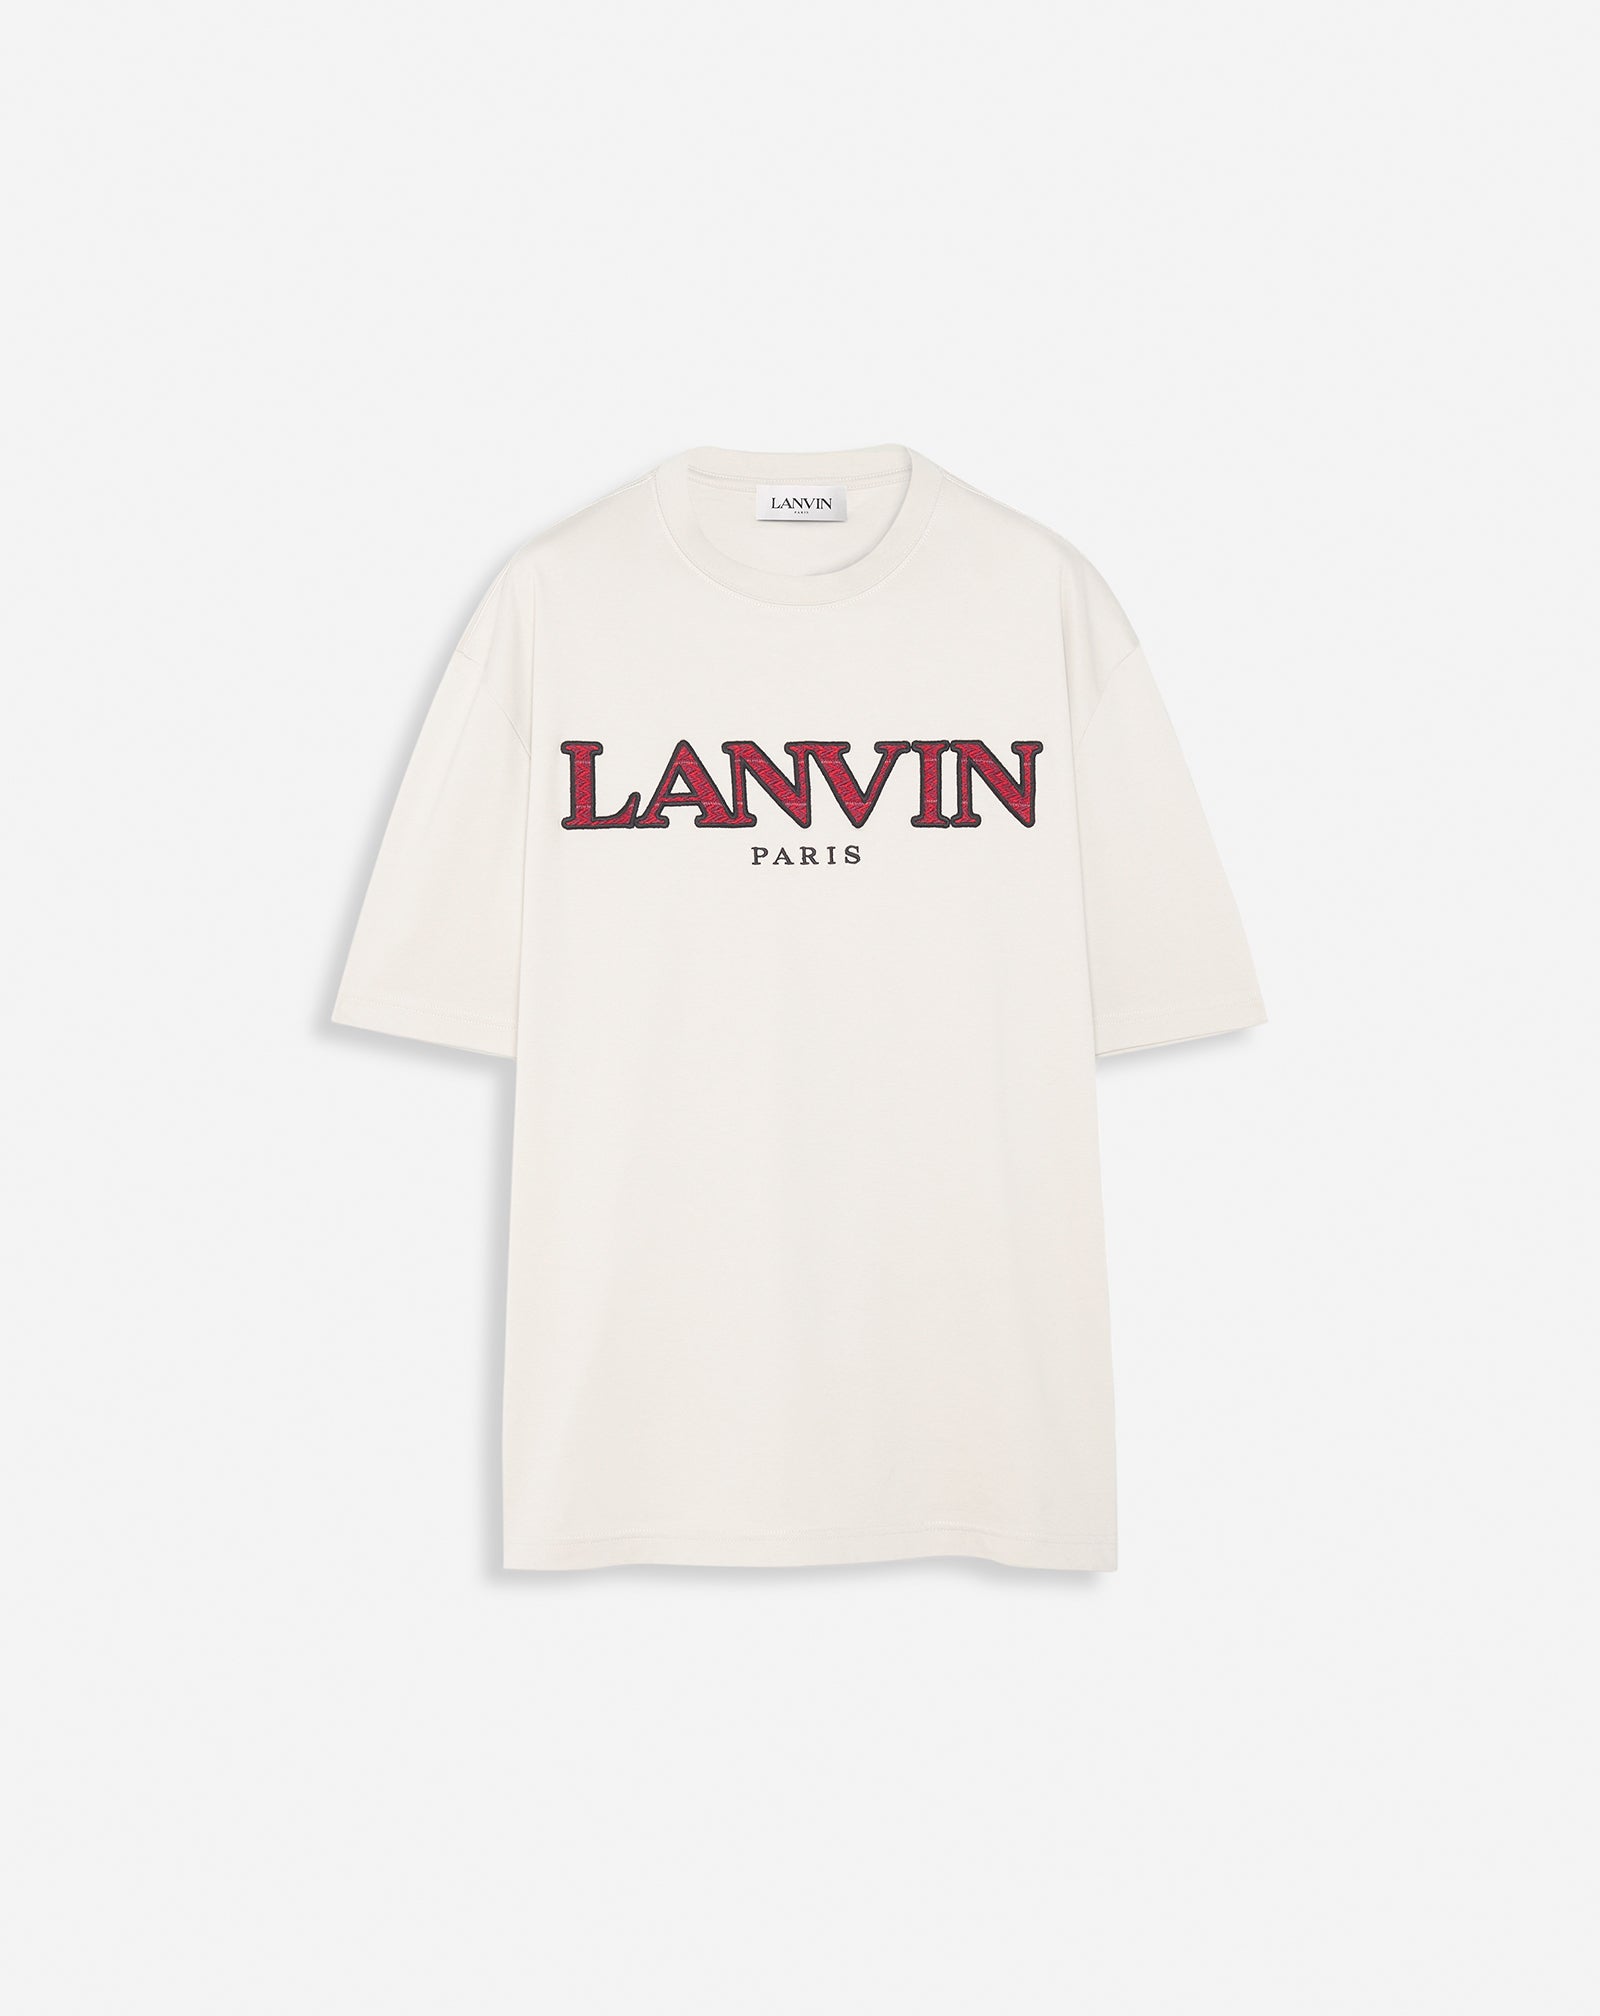 LANVIN - Official Website | Luxury clothing and accessories